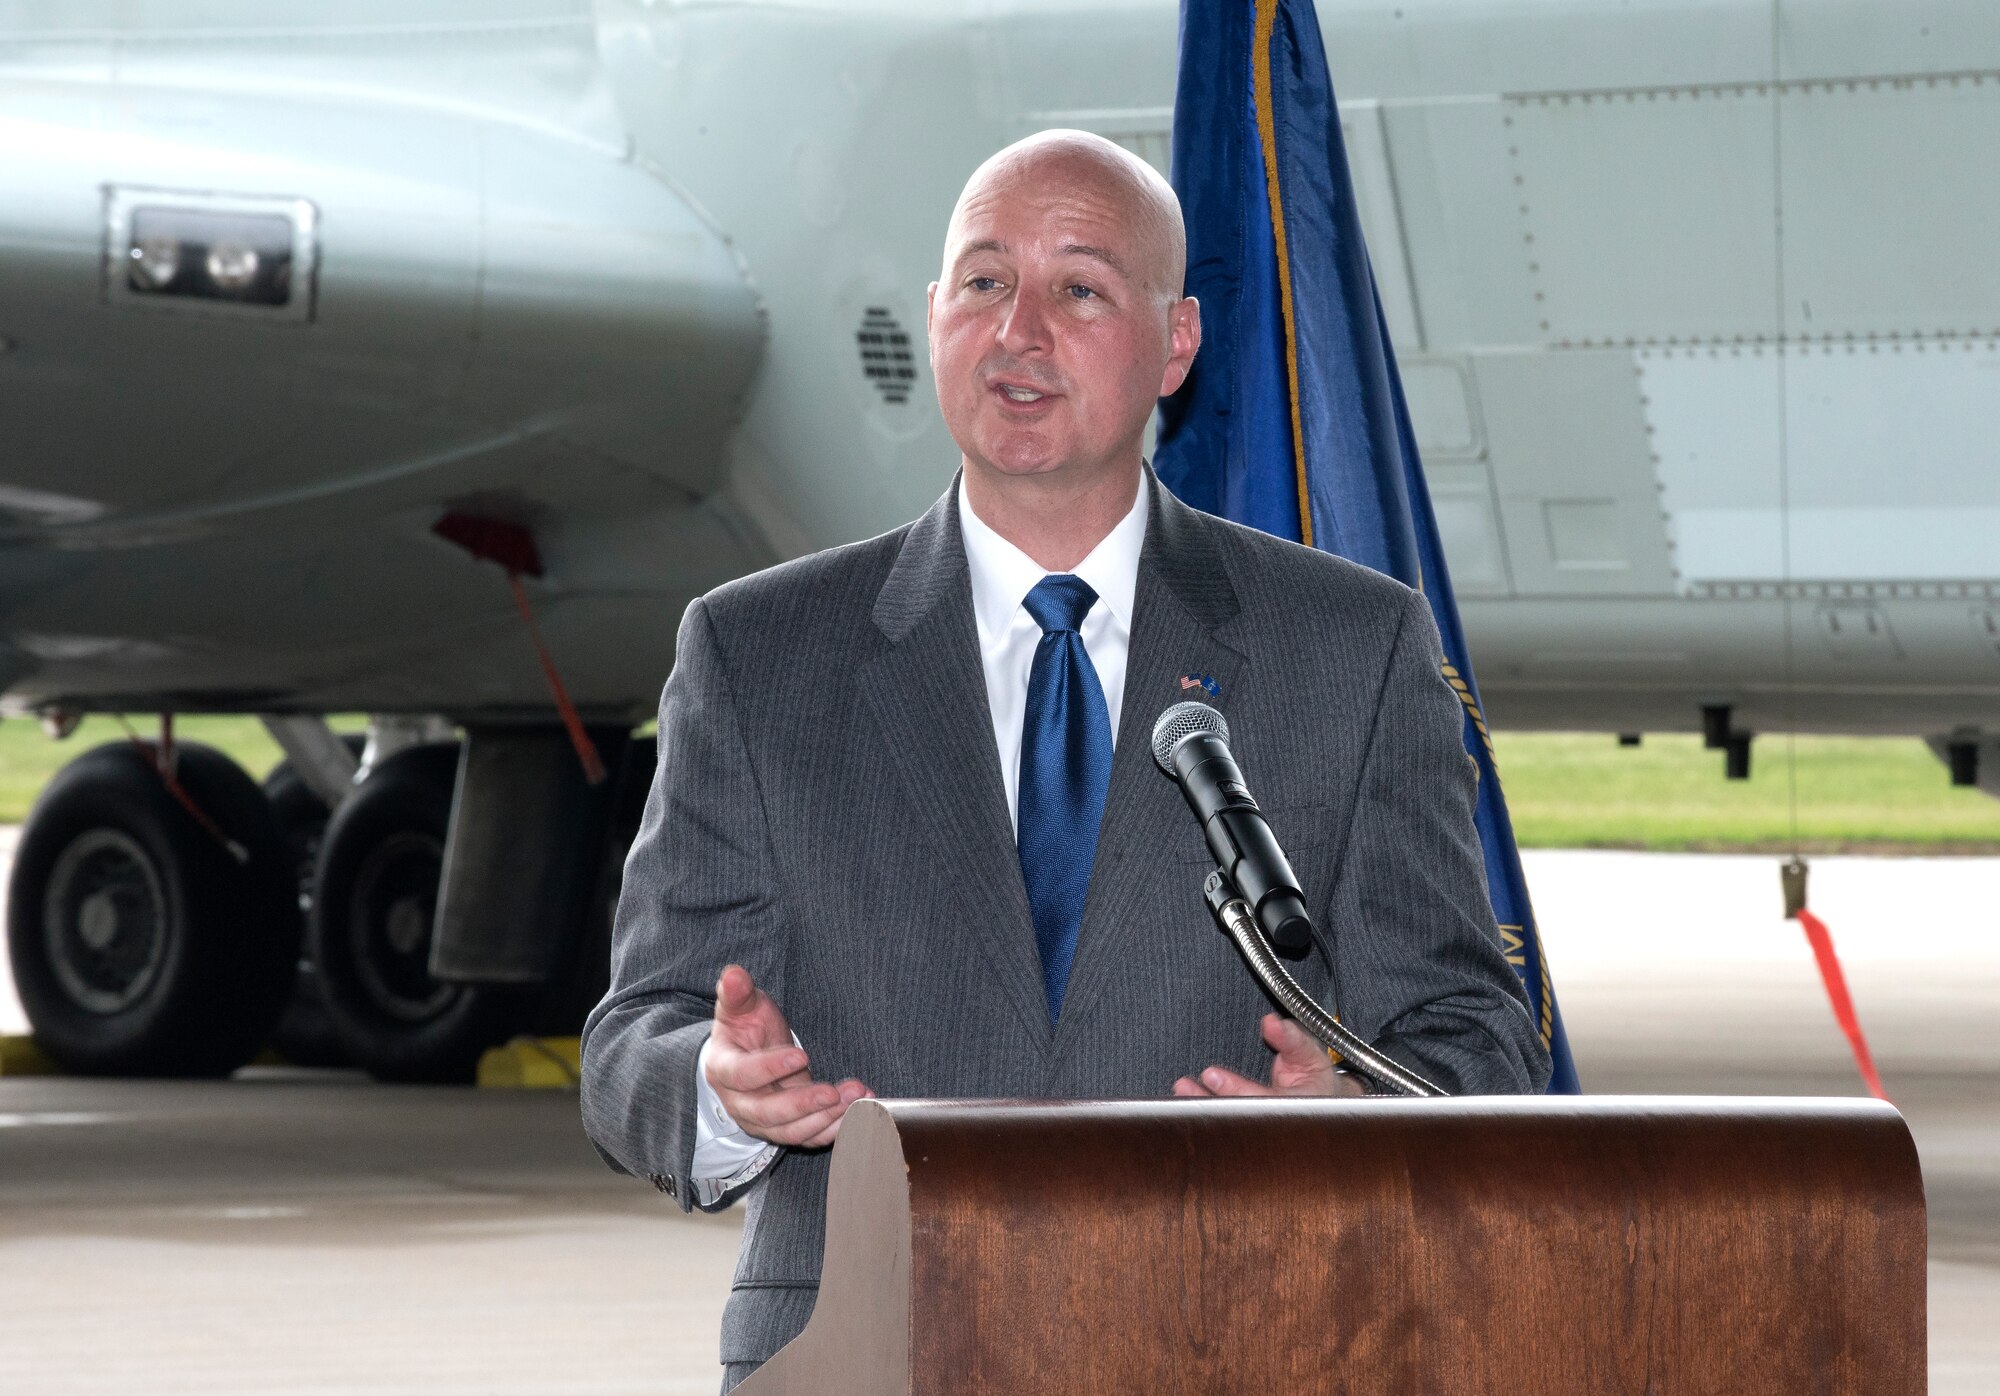 Nebraska Gov. Pete Ricketts provides remarks August 28, 2018 inside an aircraft hangar at Offutt AFB, Nebraska during an event celebrating a more than $1 million investment by the U.S. Department of Defense to STEM education in the Bellevue Public Schools system, which is the nearest community to Offutt AFB. The award is part of the National Math and Science Initiative that promotes STEM education in more than 200 U.S. schools that have significant enrollment among military-connected students. (U.S. Air Force photo by Delanie Stafford)